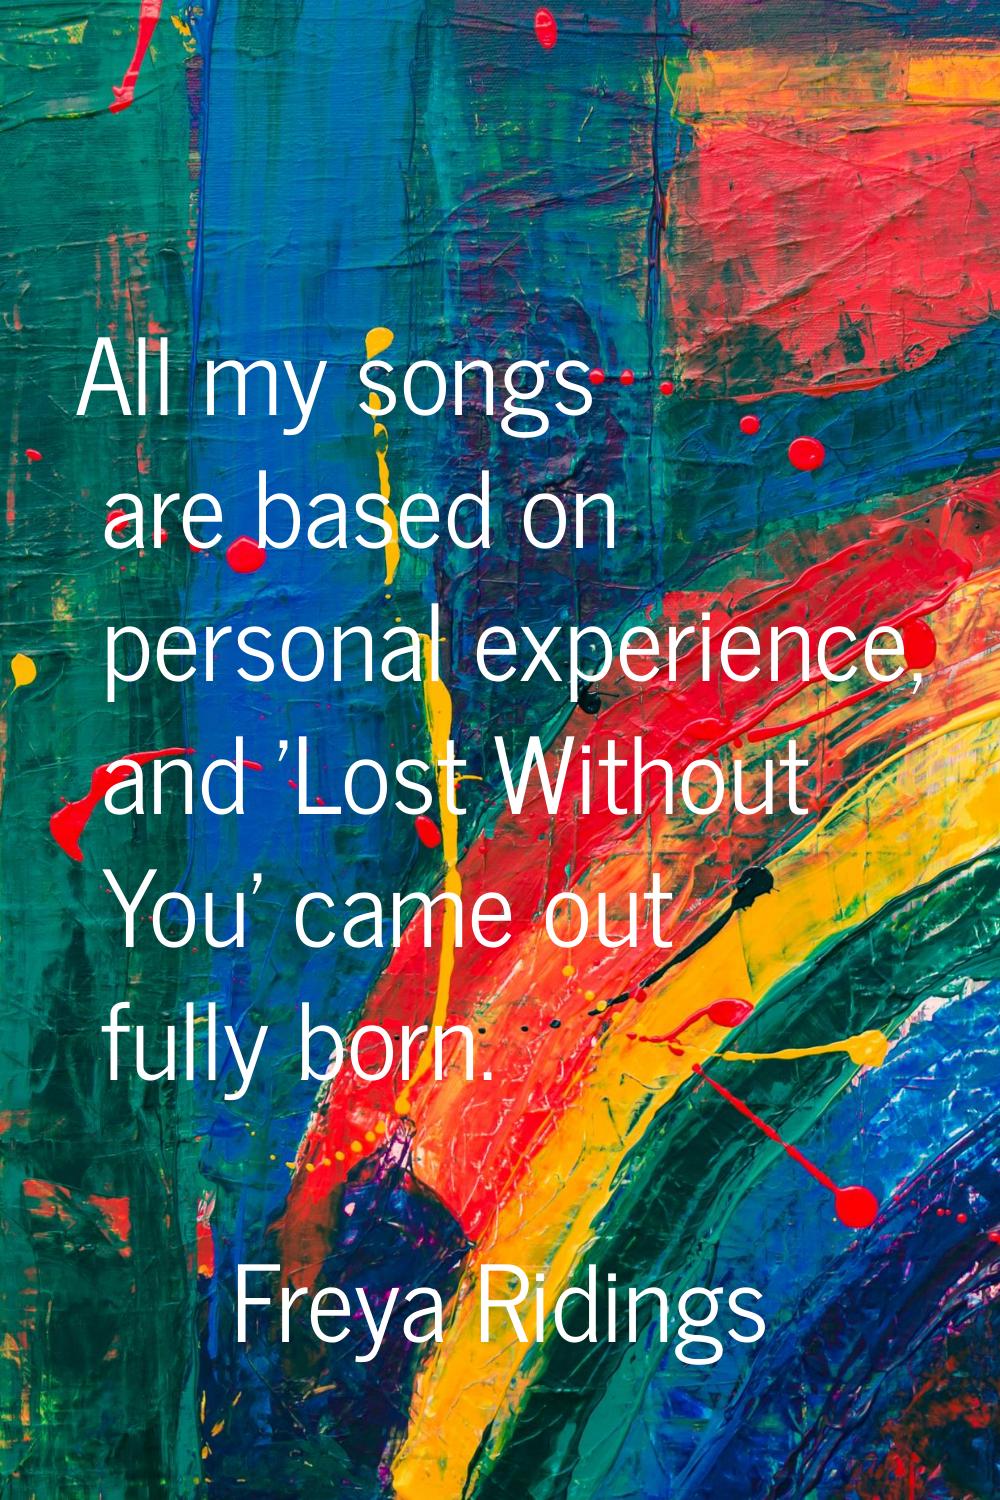 All my songs are based on personal experience, and 'Lost Without You' came out fully born.